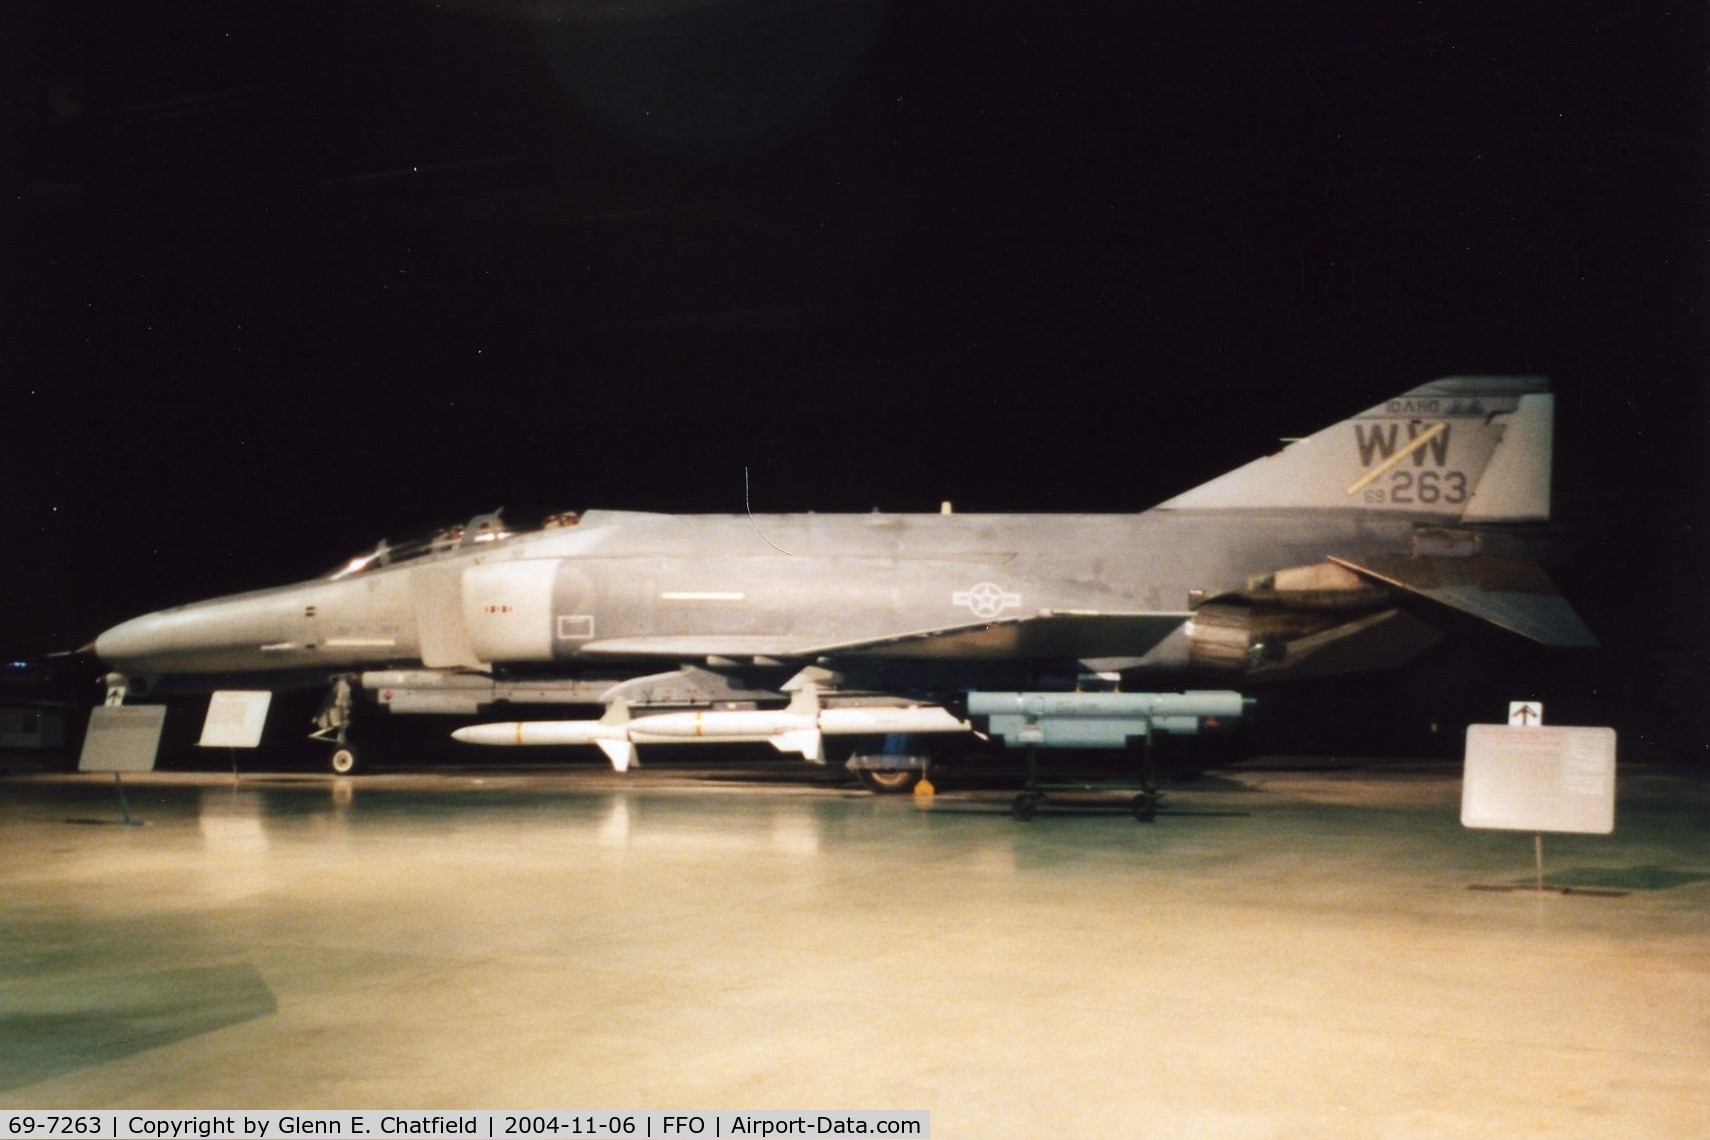 69-7263, 1969 McDonnell Douglas F-4G Phantom II C/N 3947, F-4G at the National Museum of the U.S. Air Force.